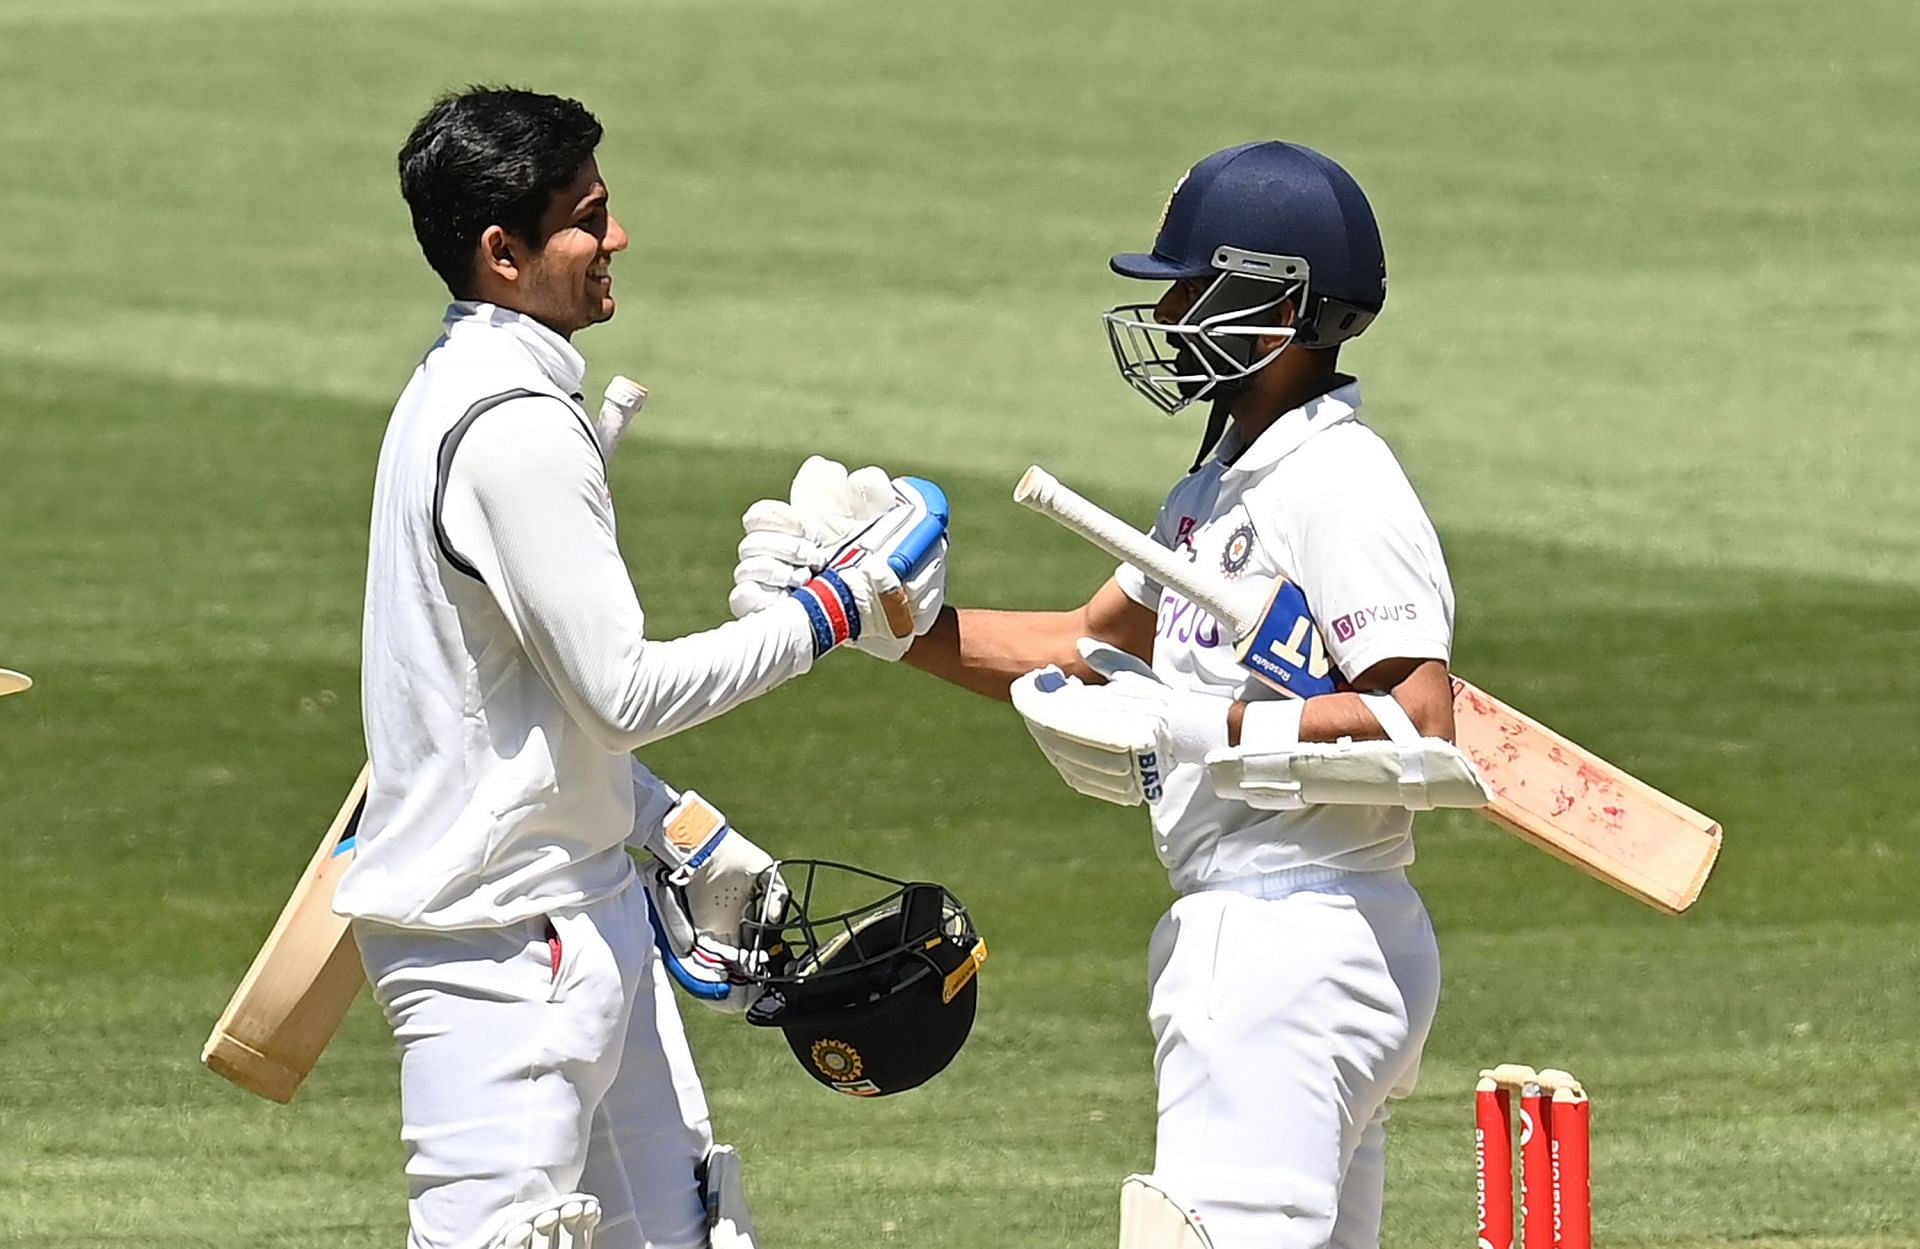 Shubman Gill and Ajinkya Rahane celebrate victory in the 2020 Boxing Day Test against the Aussies. Pic: Getty Images